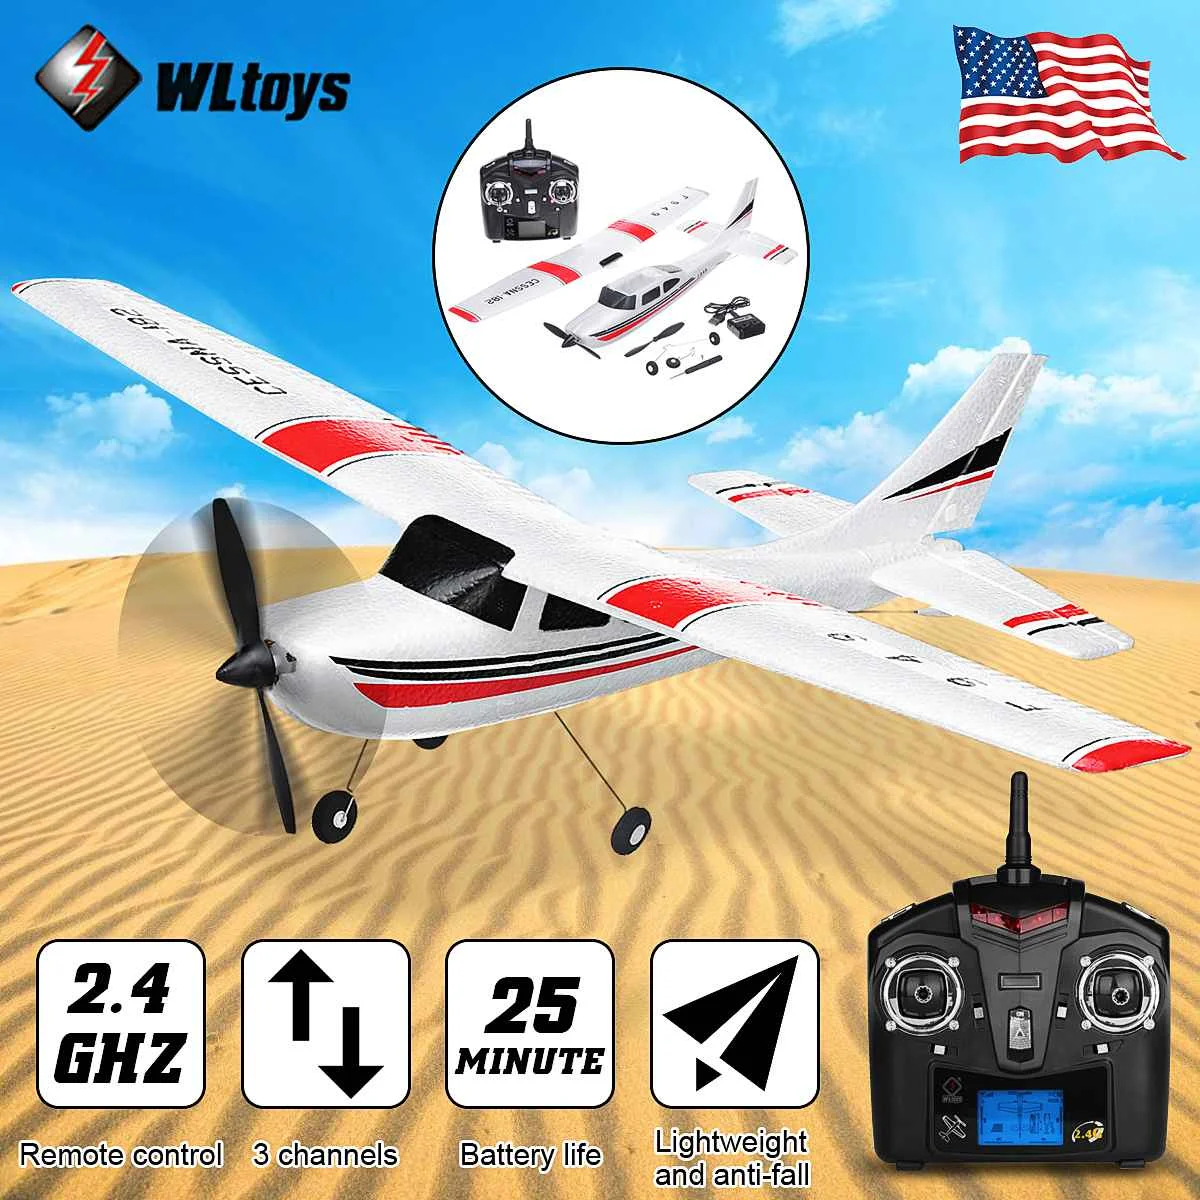 

WLtoys RC Airplane Outdoor Toys Fixed Wing Plane Cessna F949 3CH 2.4G RTF Upgrade Version with Digital servo propeller Gyroscope